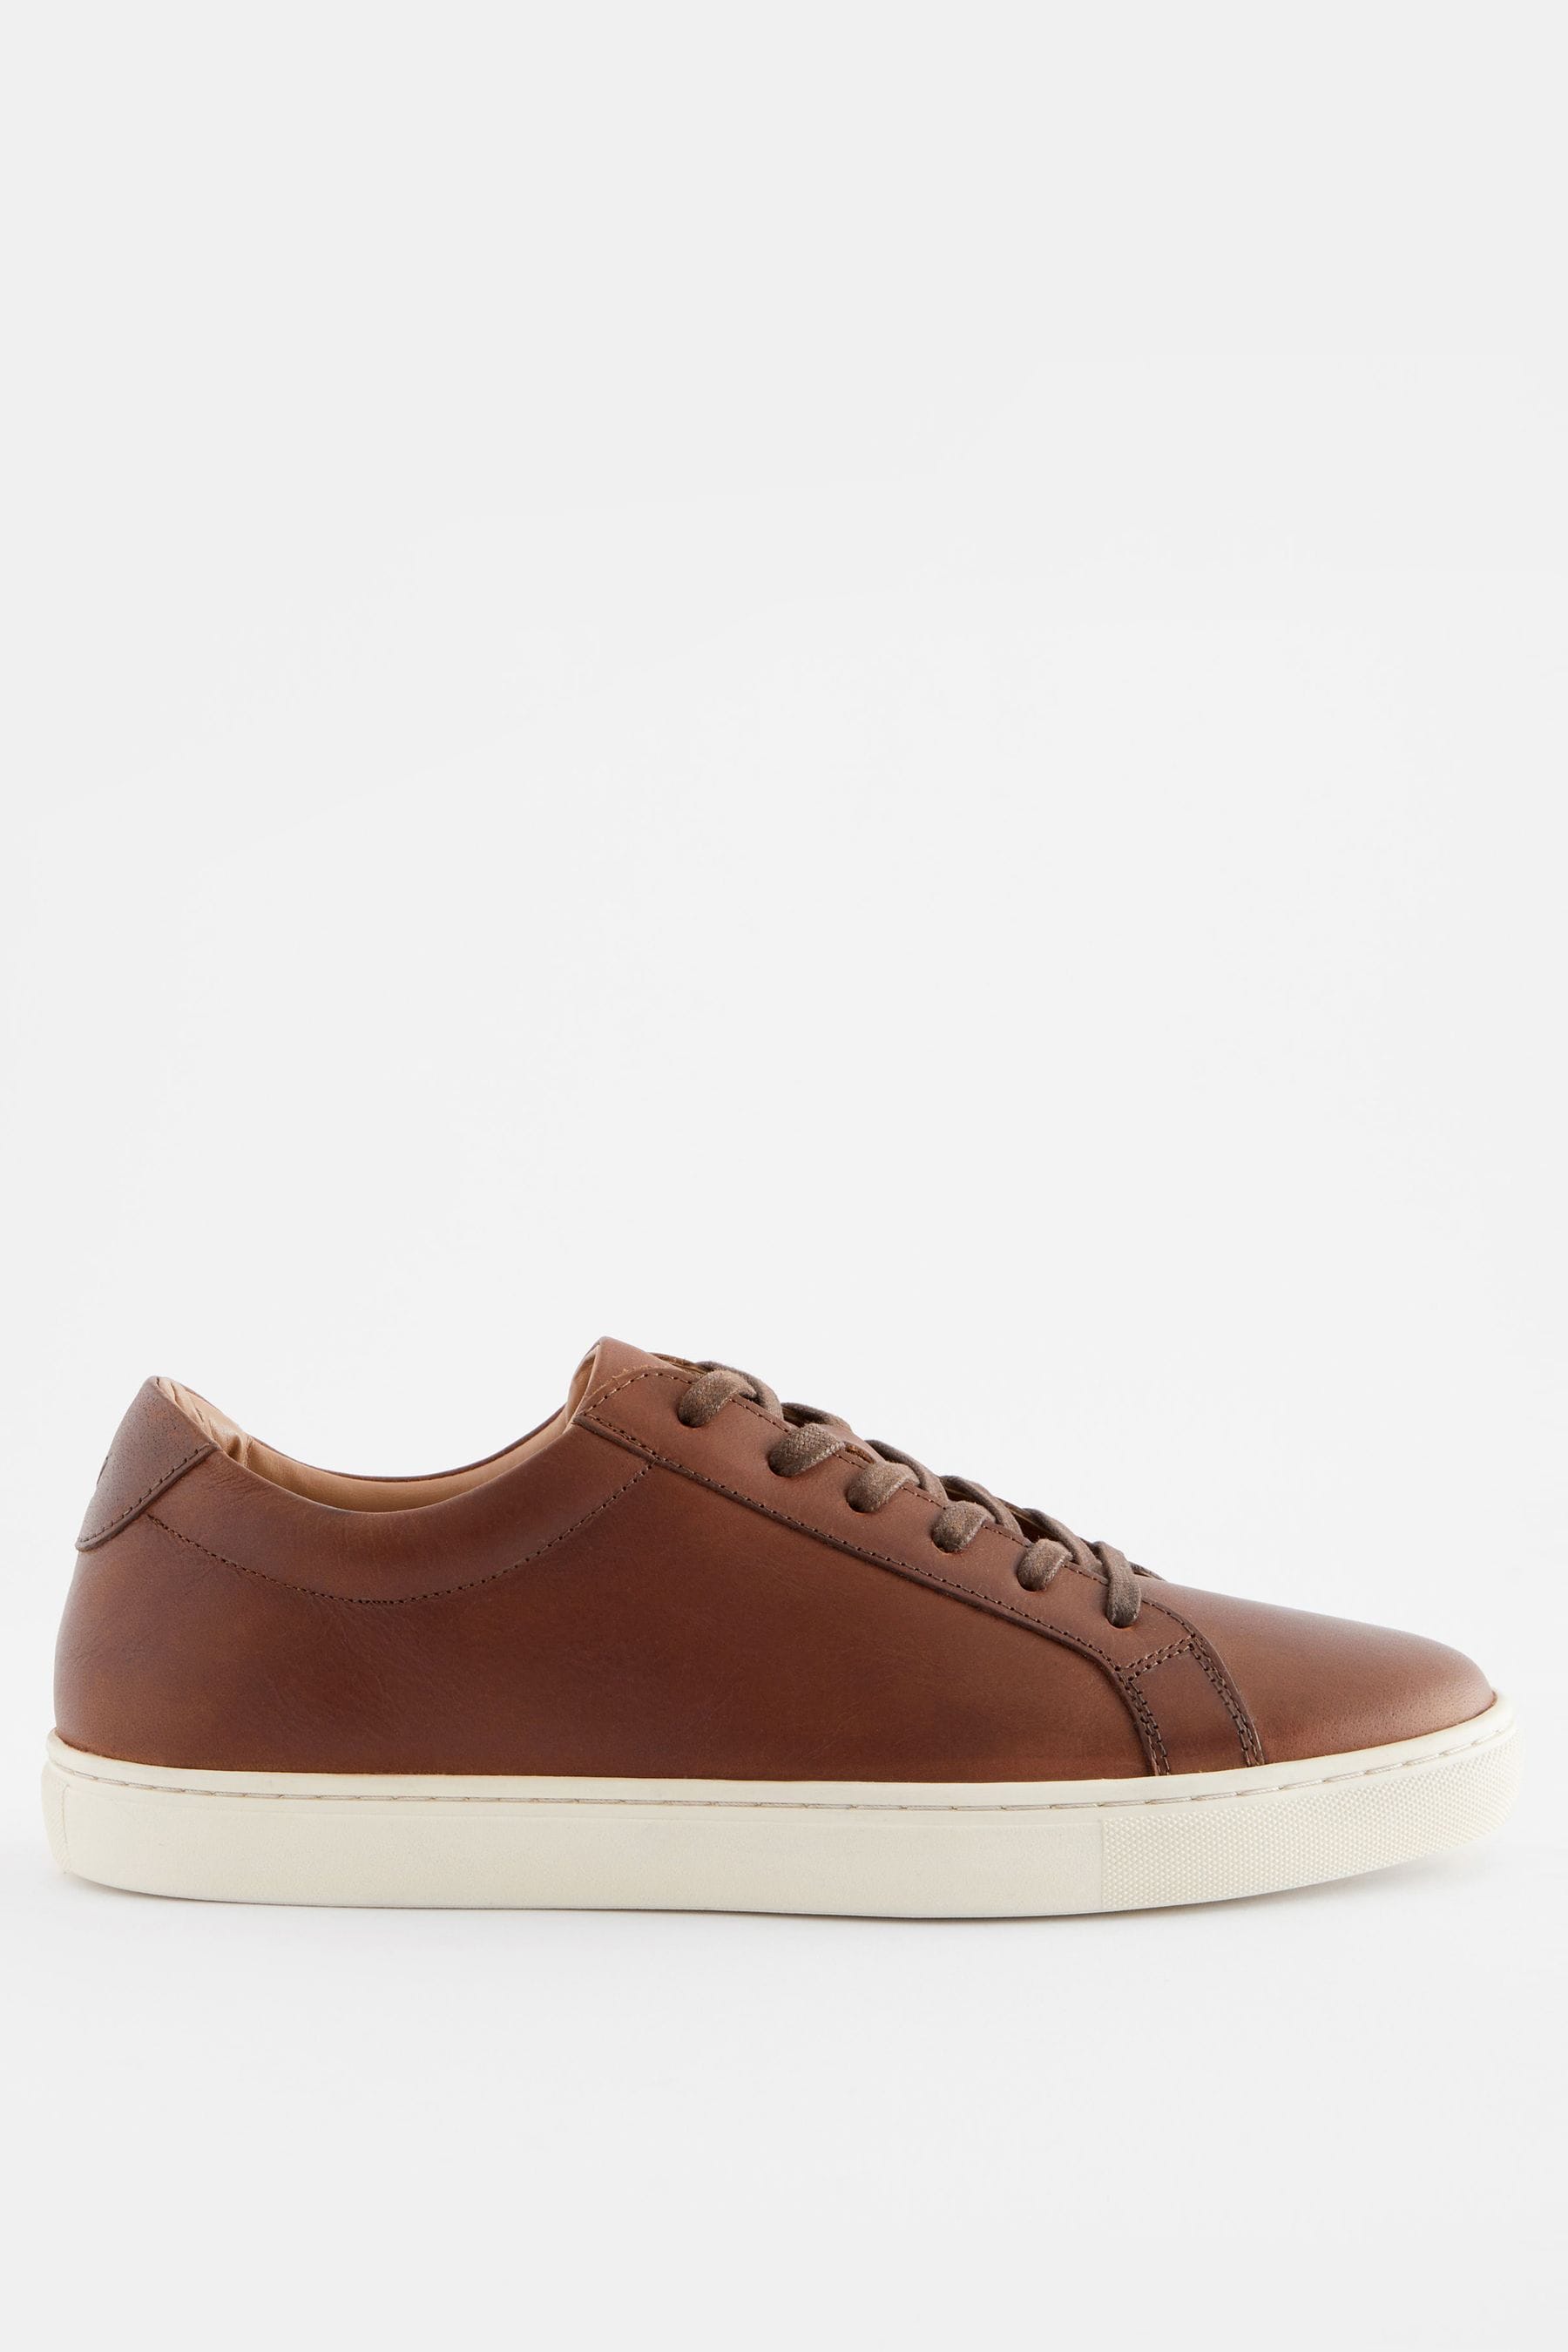 Buy Brown Leather Trainers from the Next UK online shop